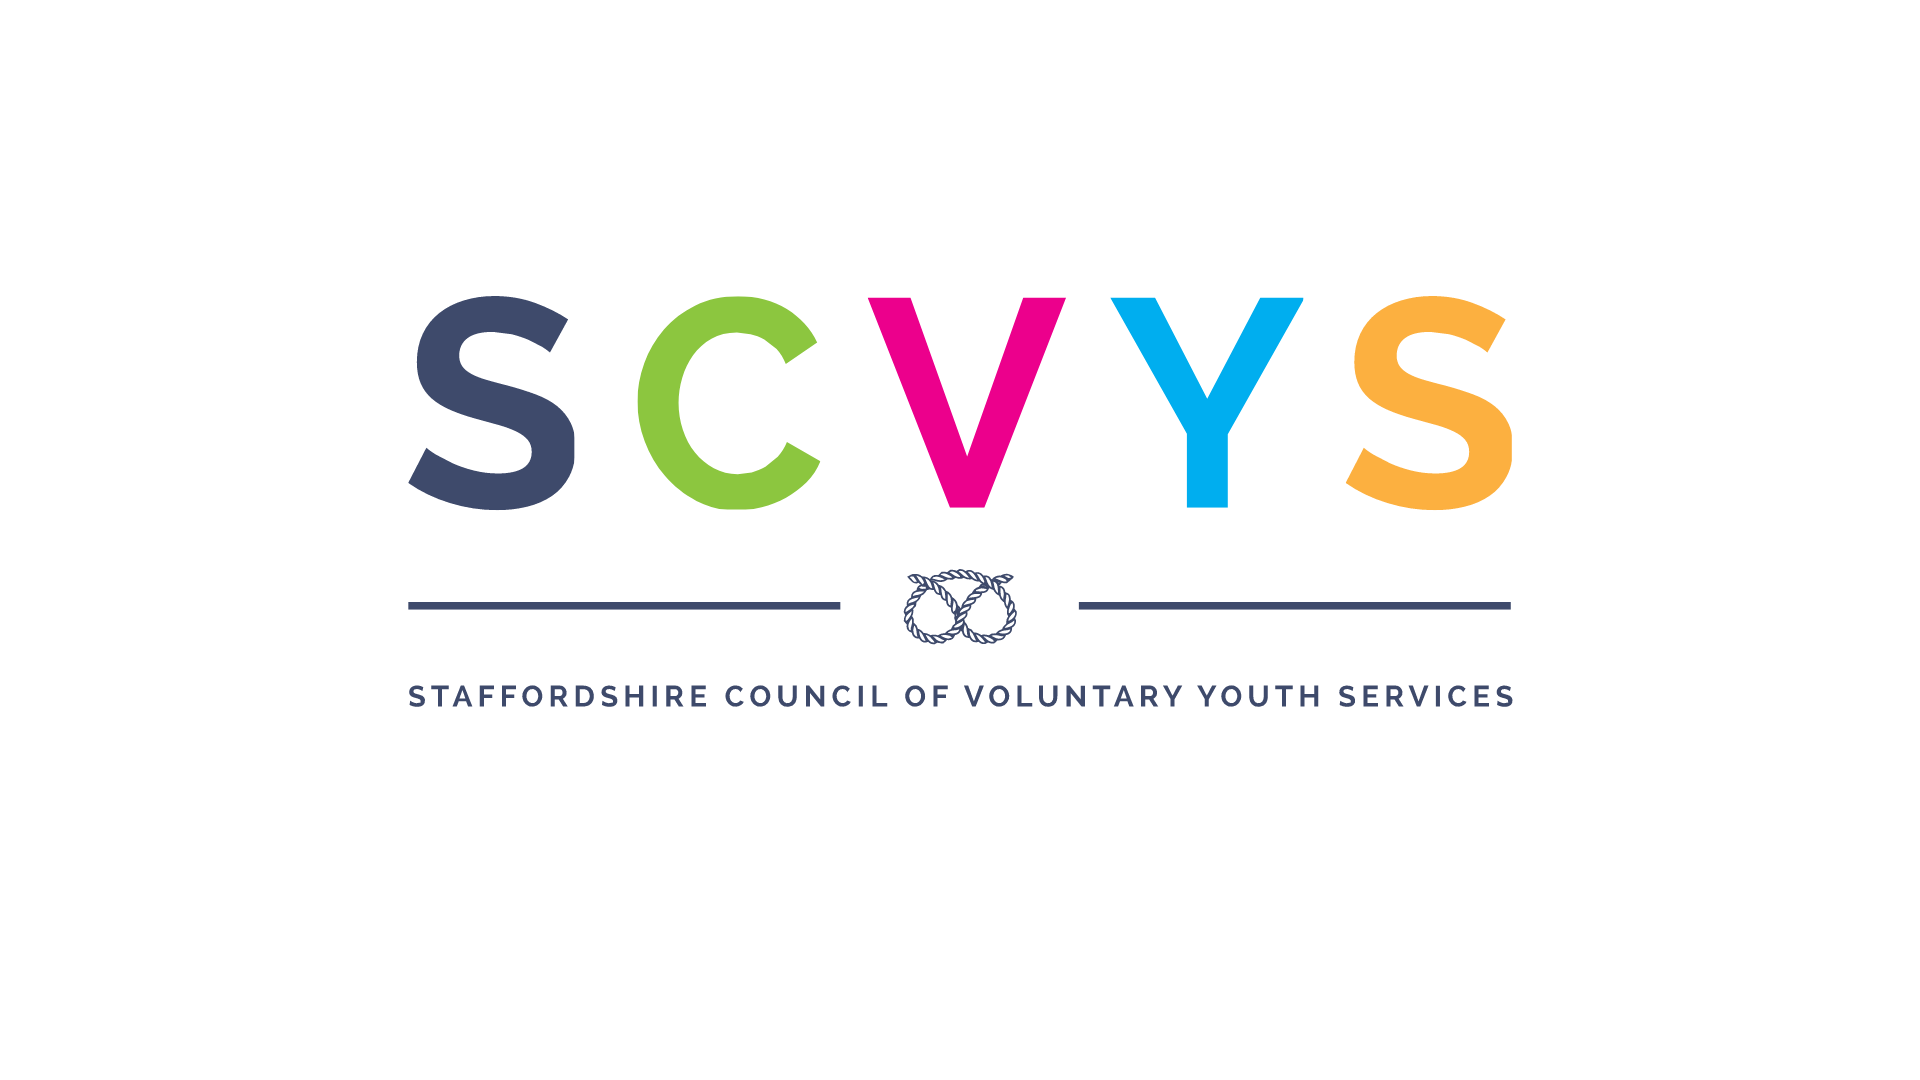 Staffordshire Council of Voluntary Youth Services